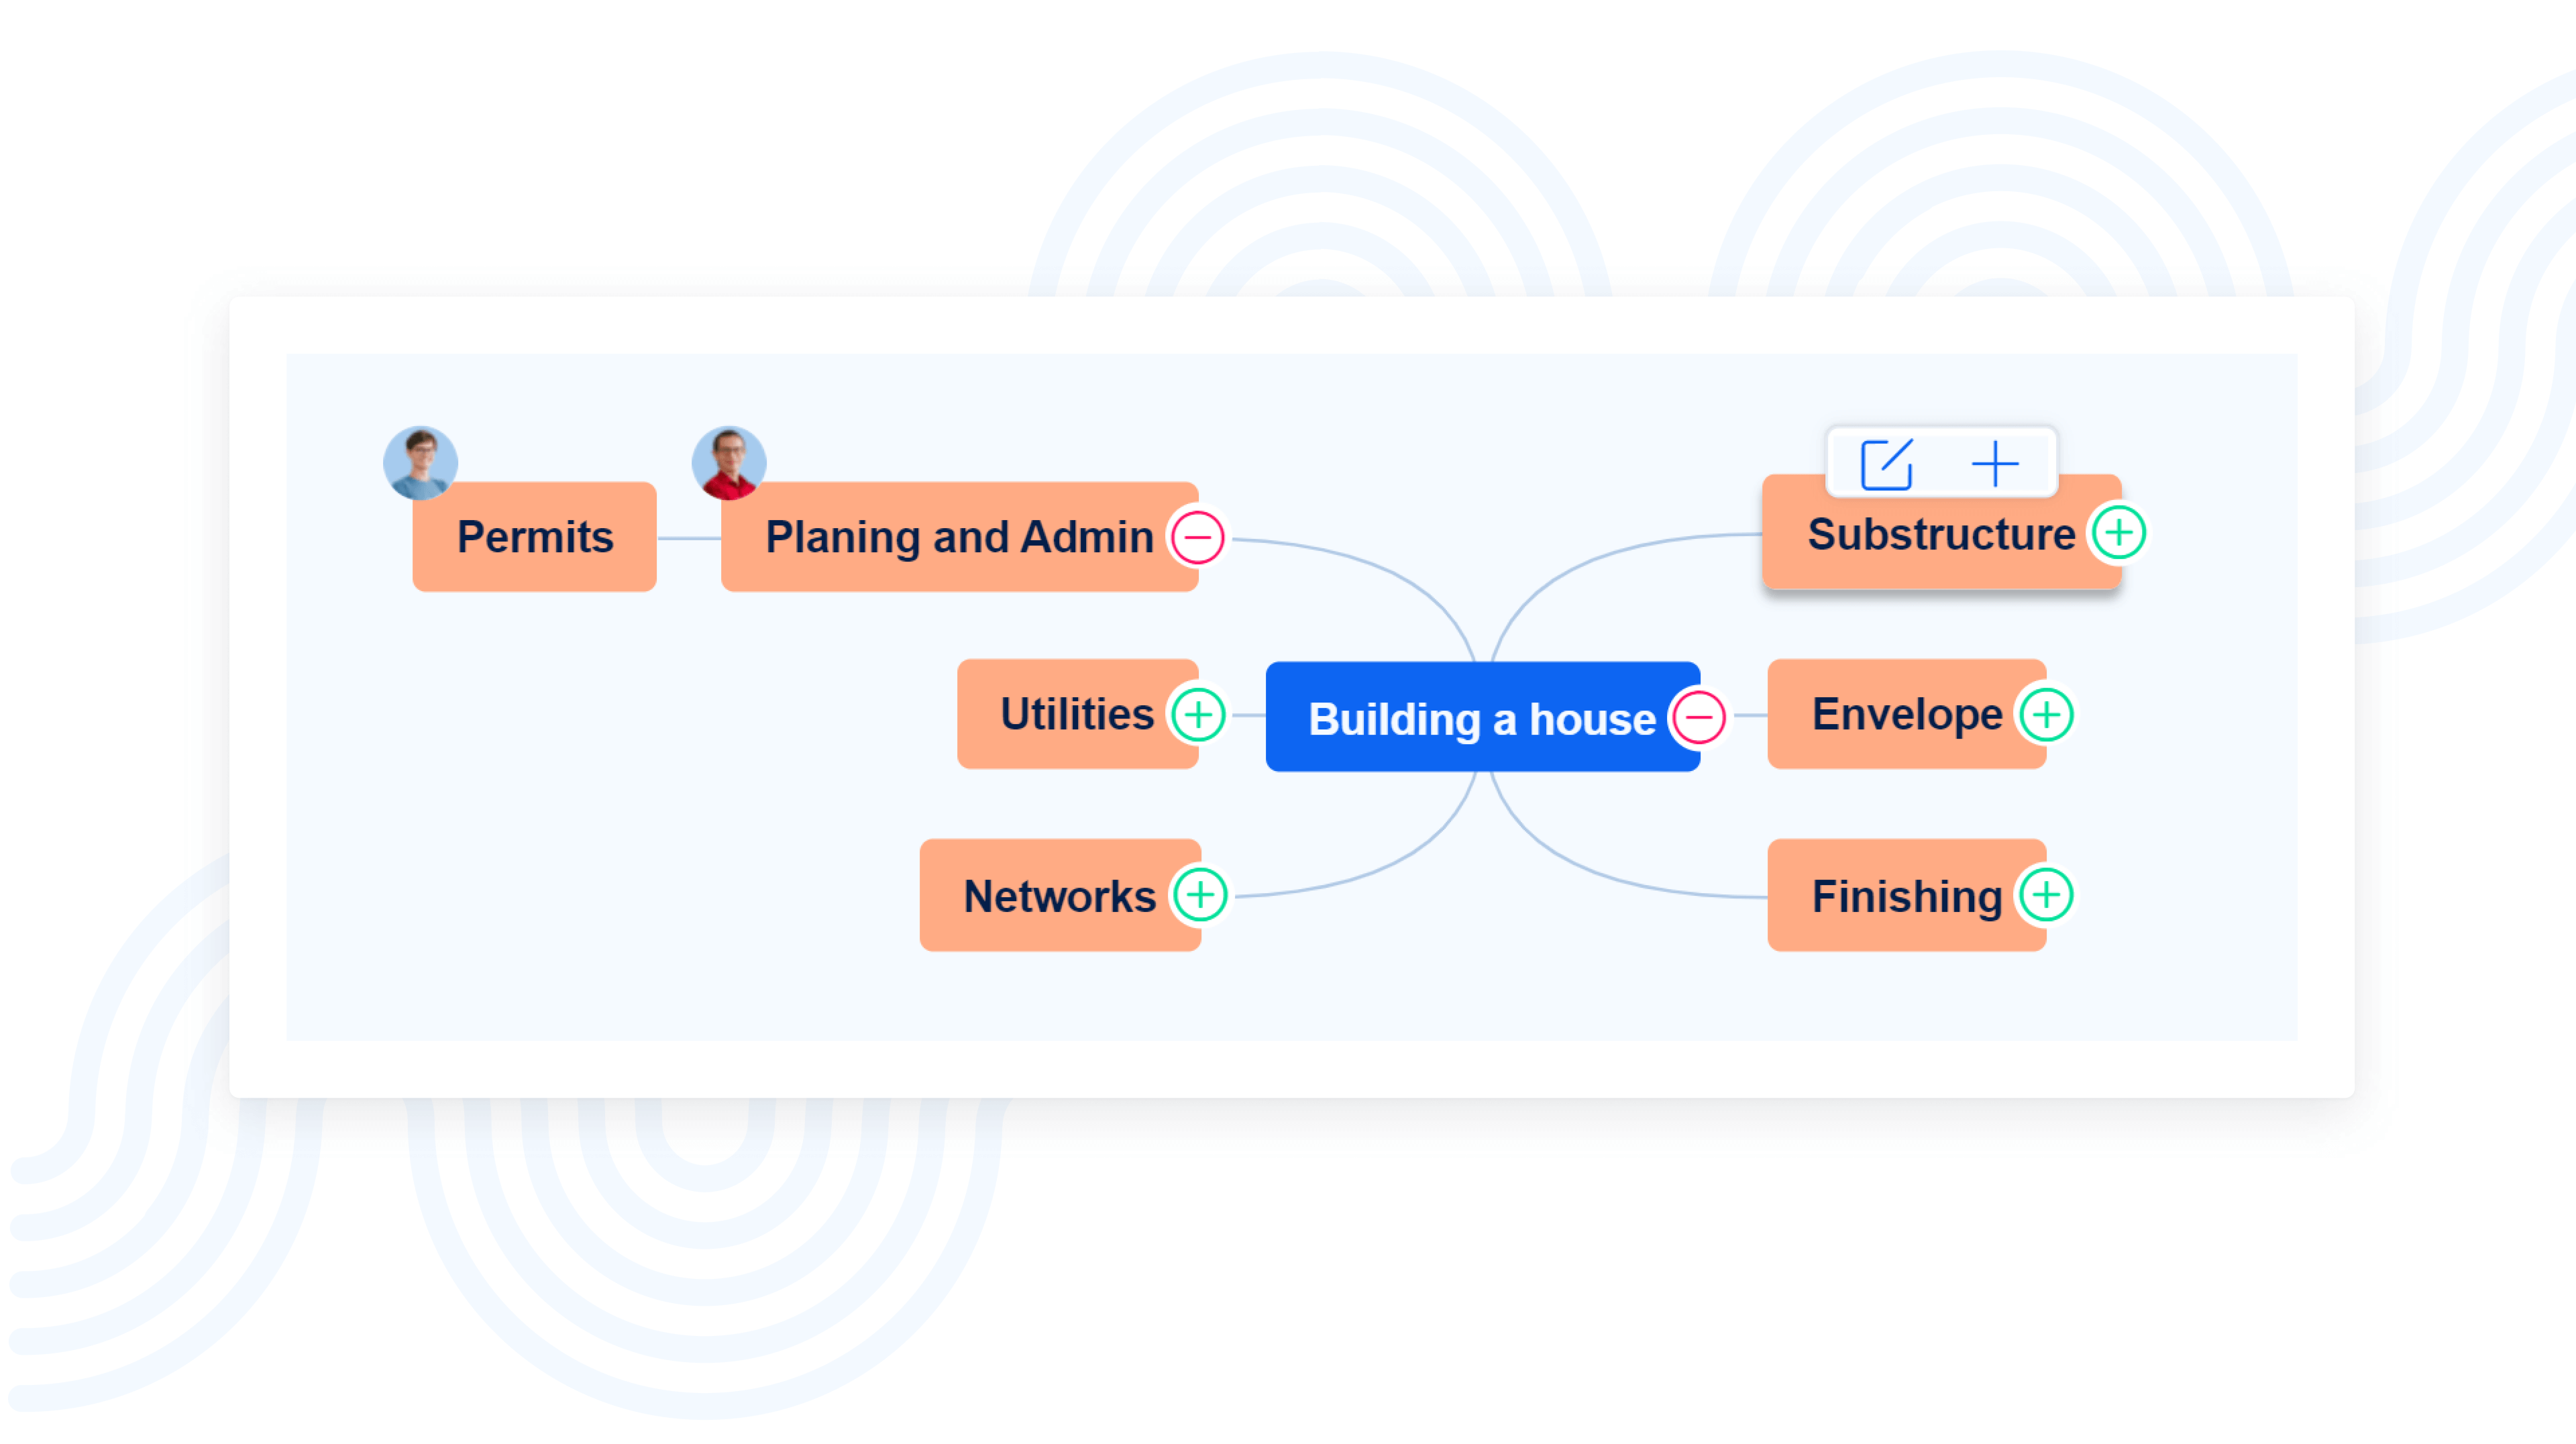 Work breakdown structure feature of Easy Redmine.